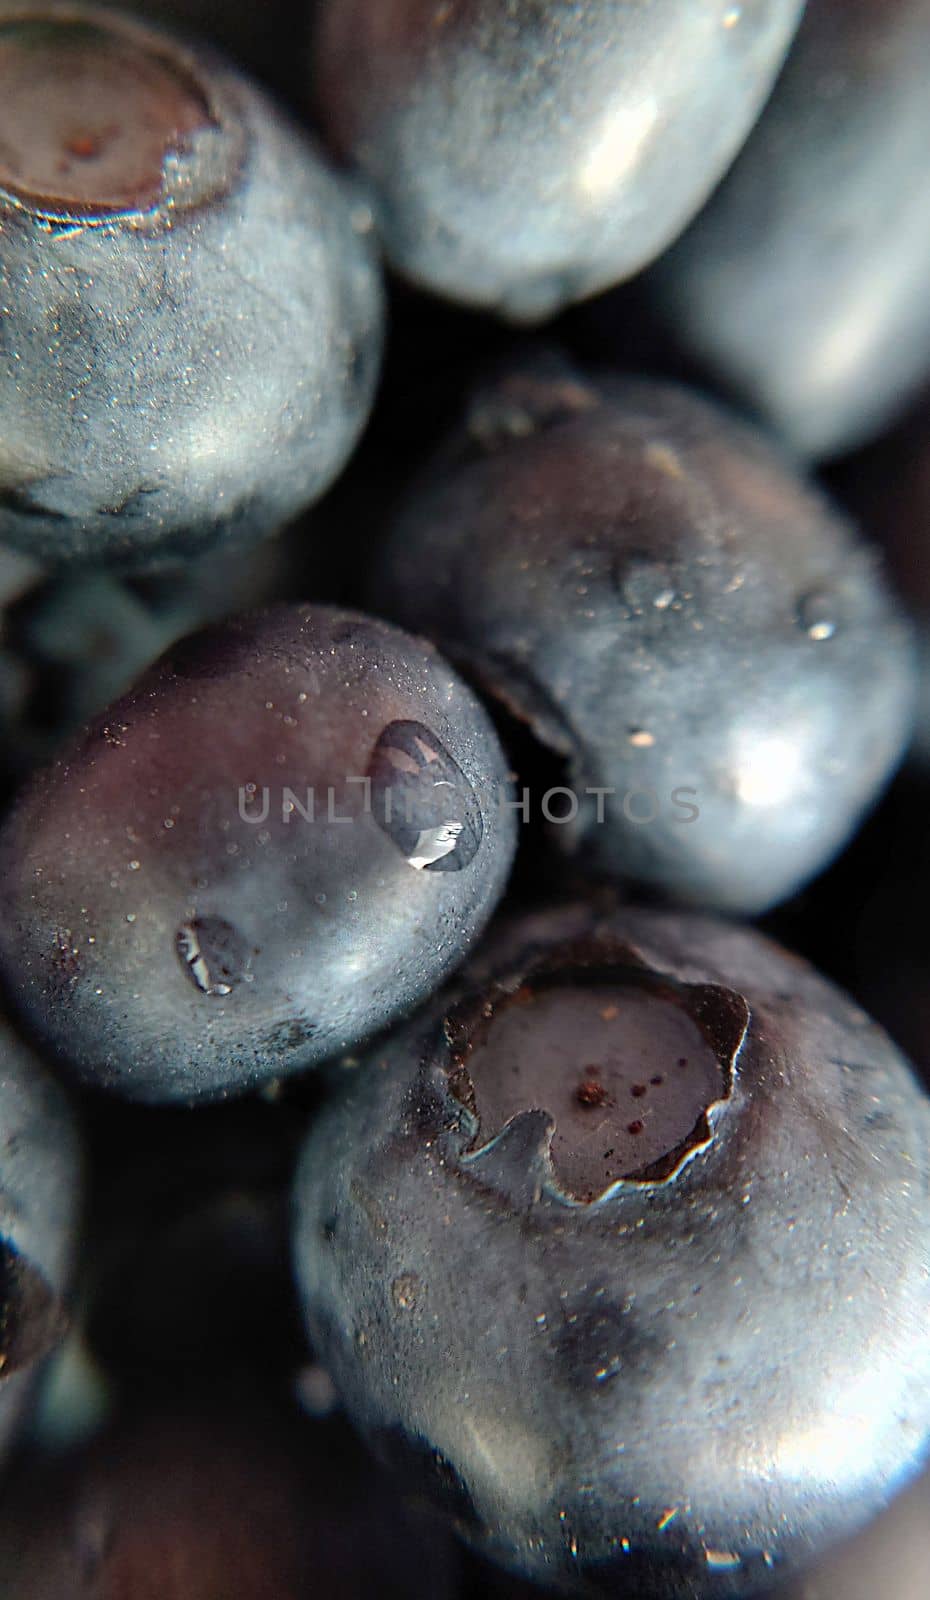 A handful of blueberries with a drop of water on the surface close-up by Mastak80